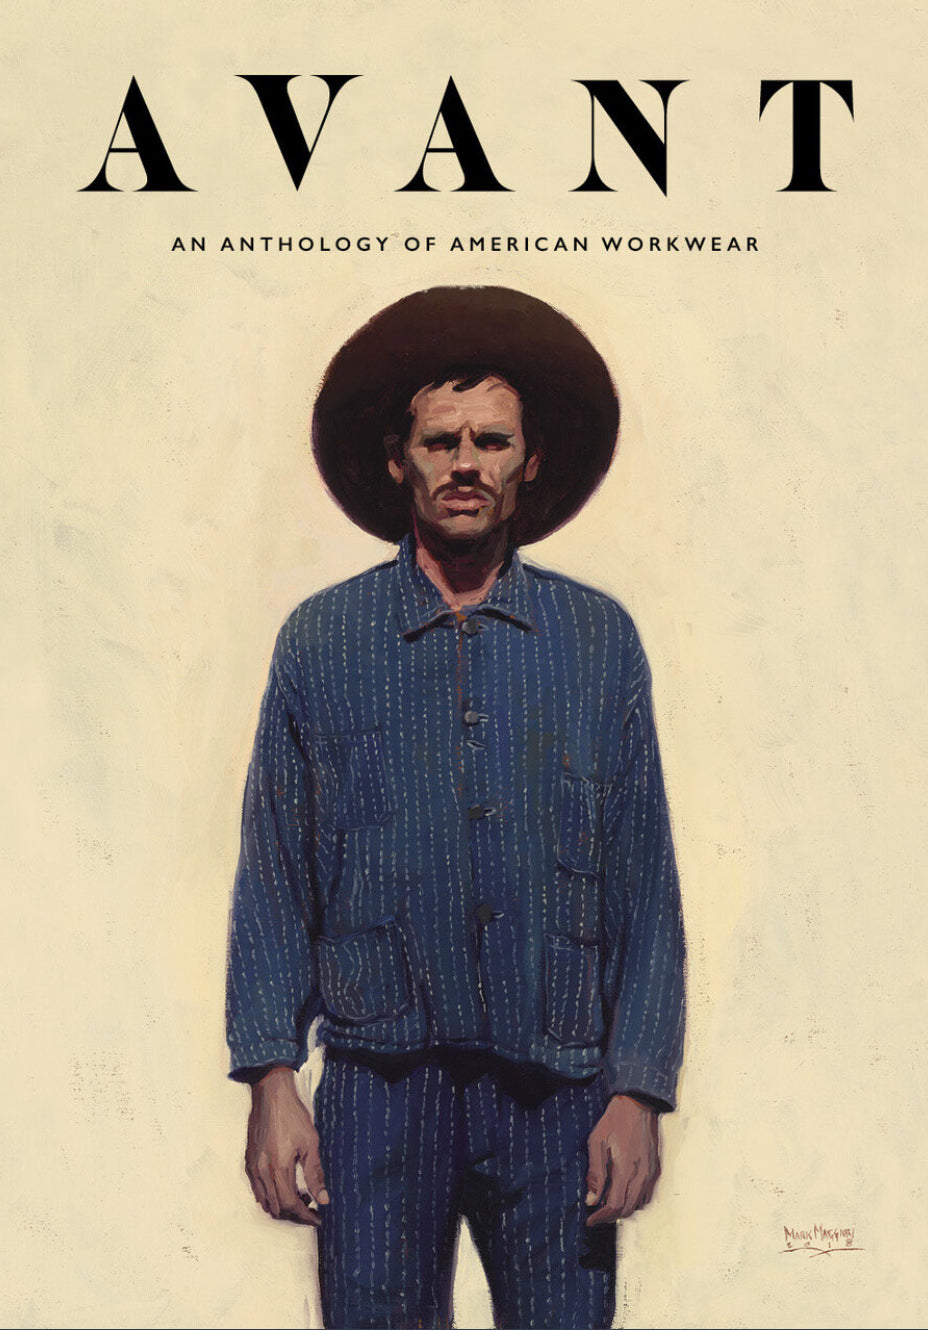 An Anthology of American Workwear